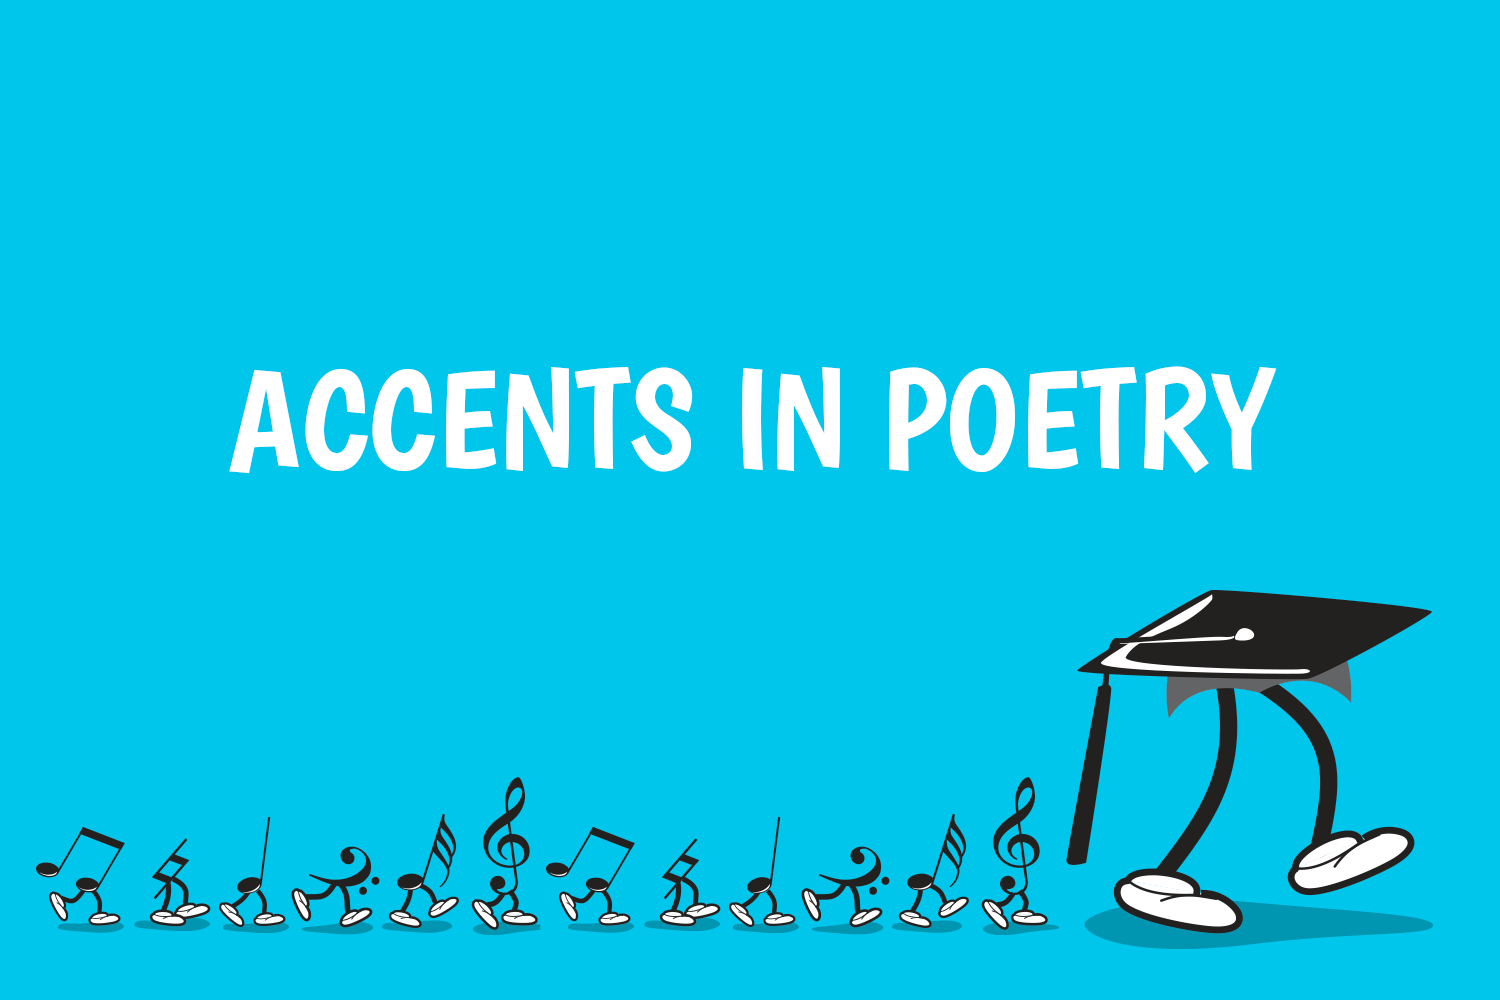 Accents in Poetry